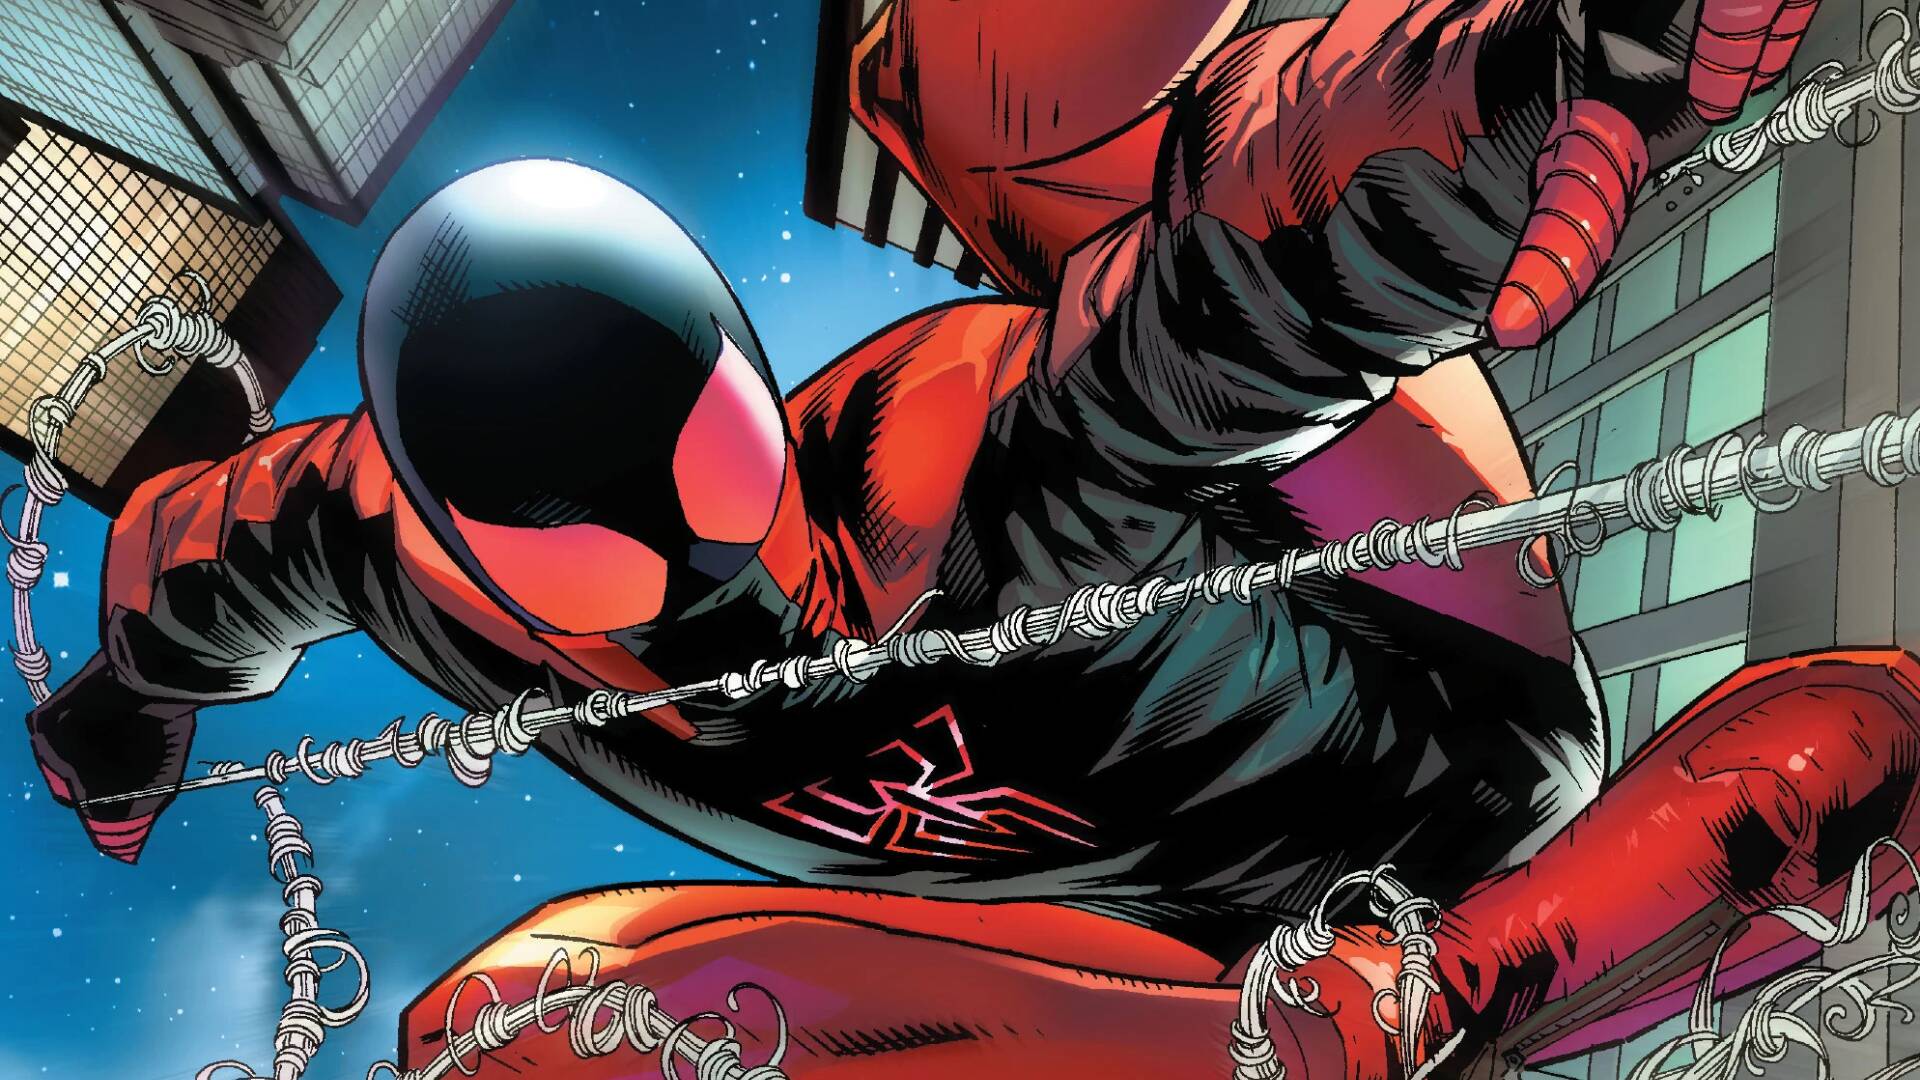 A nice mixture of Scarlet Spider and Miles's Spider-Man suit